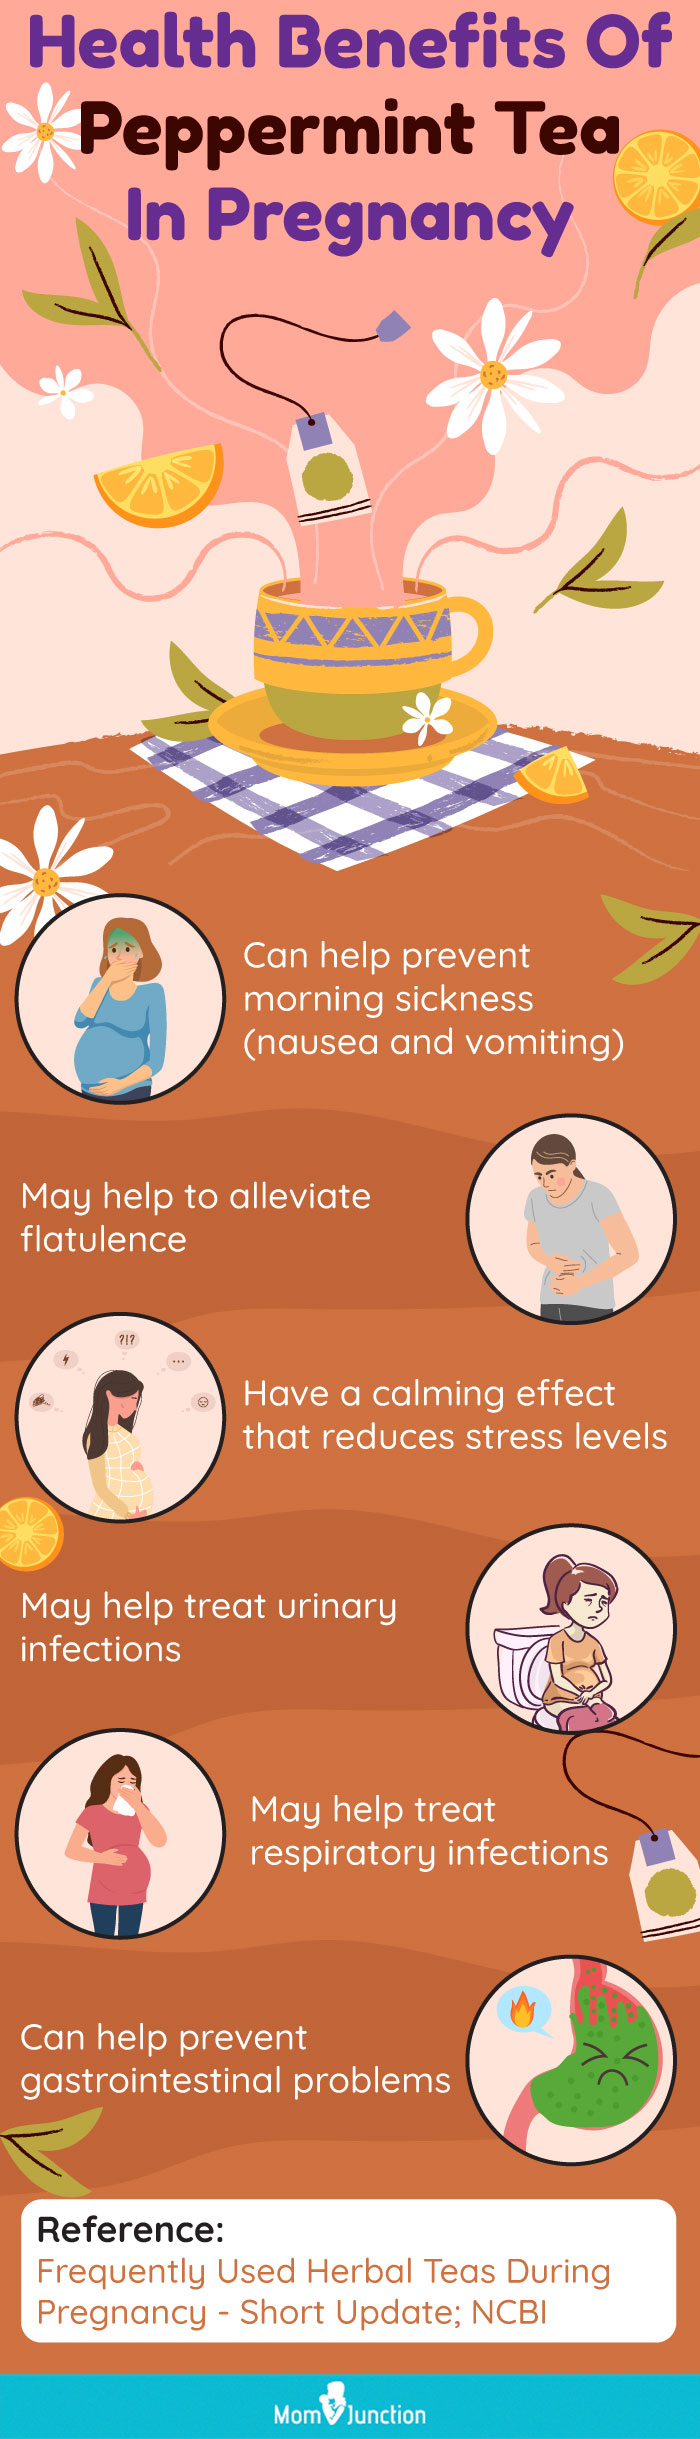 health benefits of peppermint tea while pregnant (infographic)